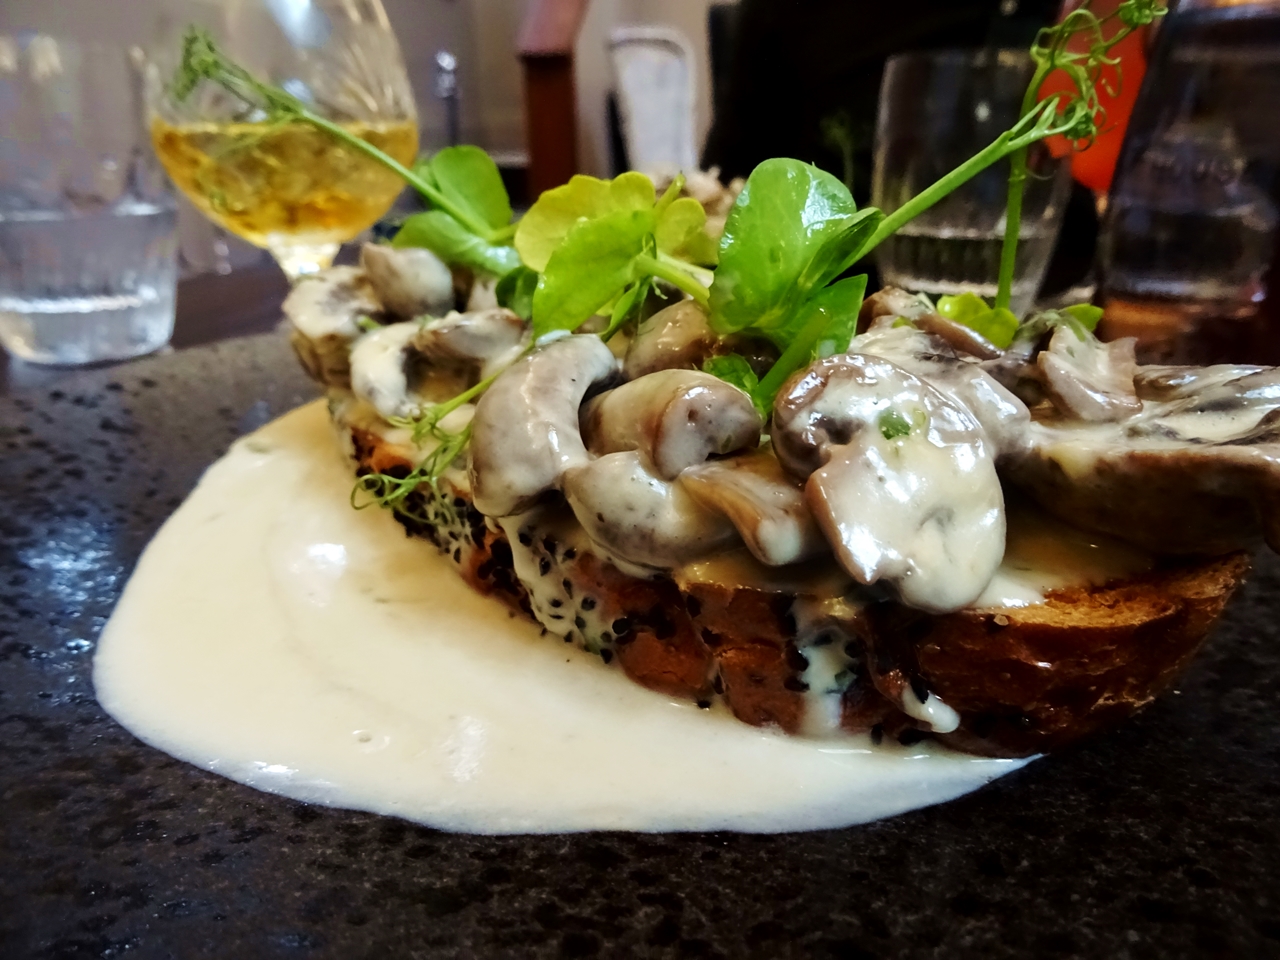 bloomer shrooms starter courthouse cheshire knutsford